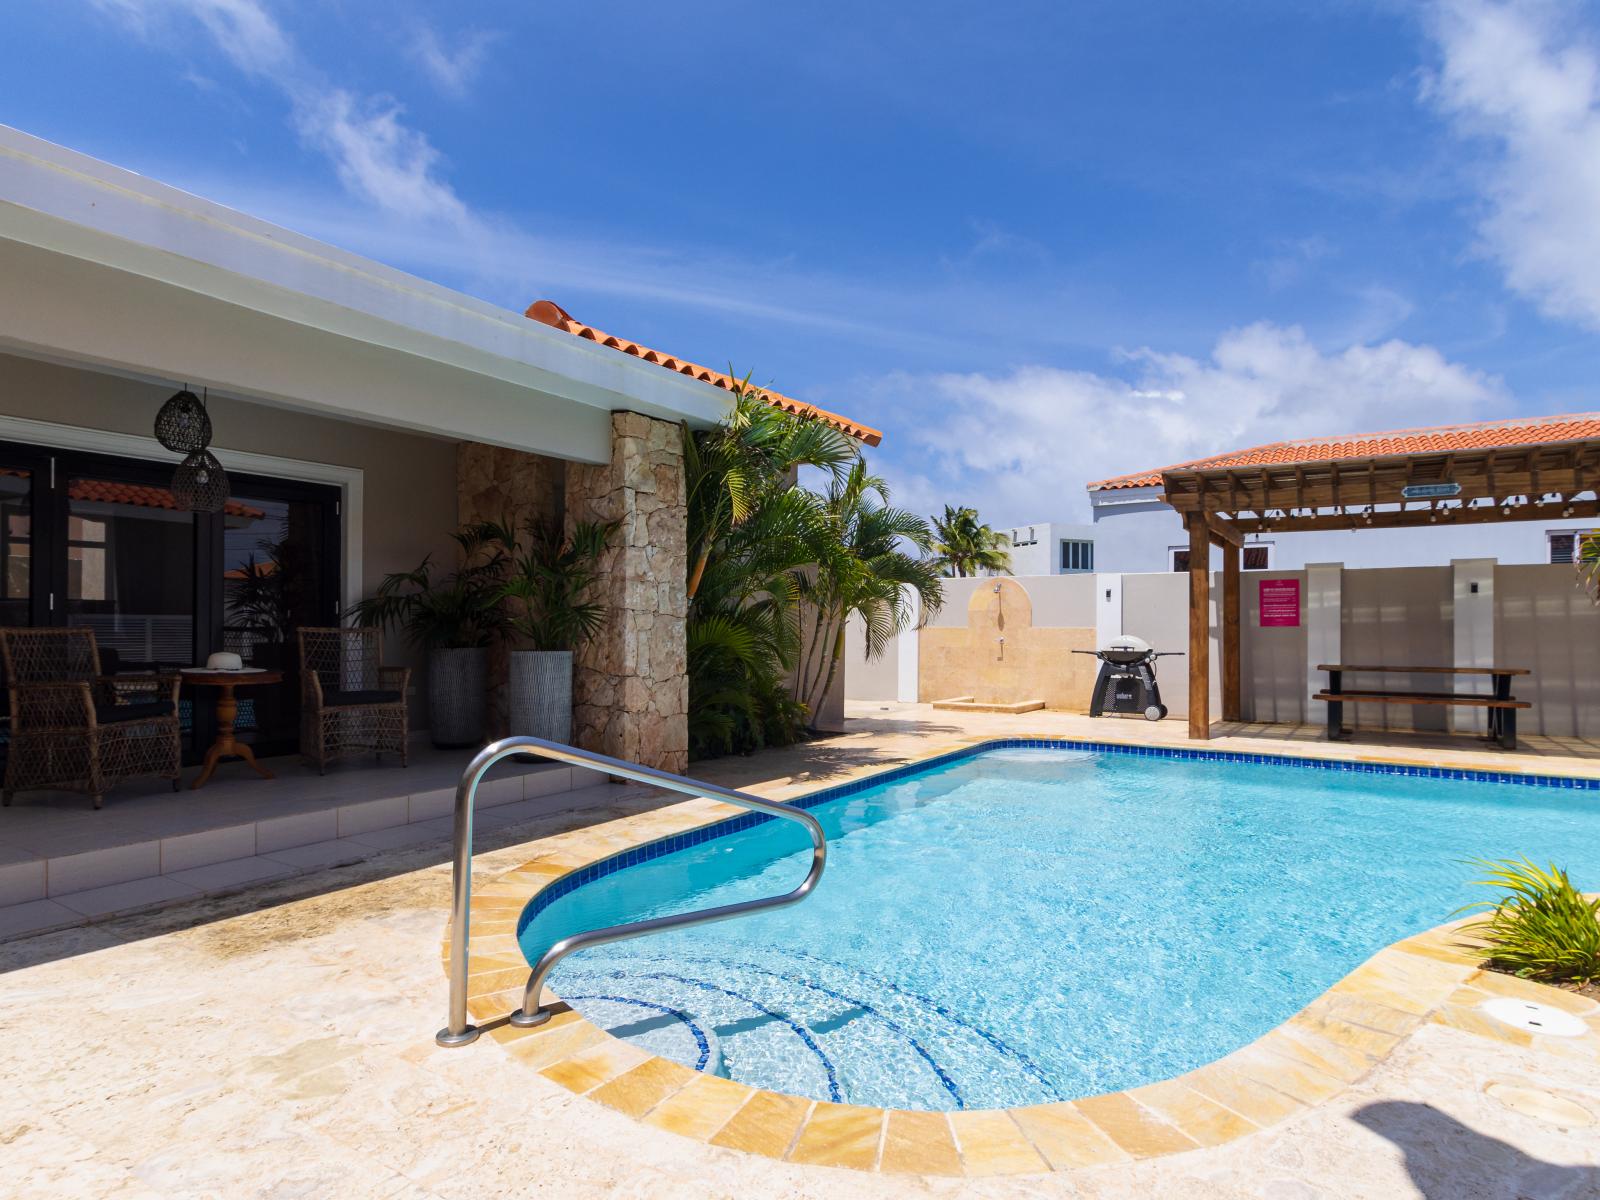 Captivating Pool Area of the Apartment in Noord Aruba - A spot for friends and family to gather and socialize - Palm trees and tropical plants enhance the vacation feel - Pool Area with shaded outdoor seating option